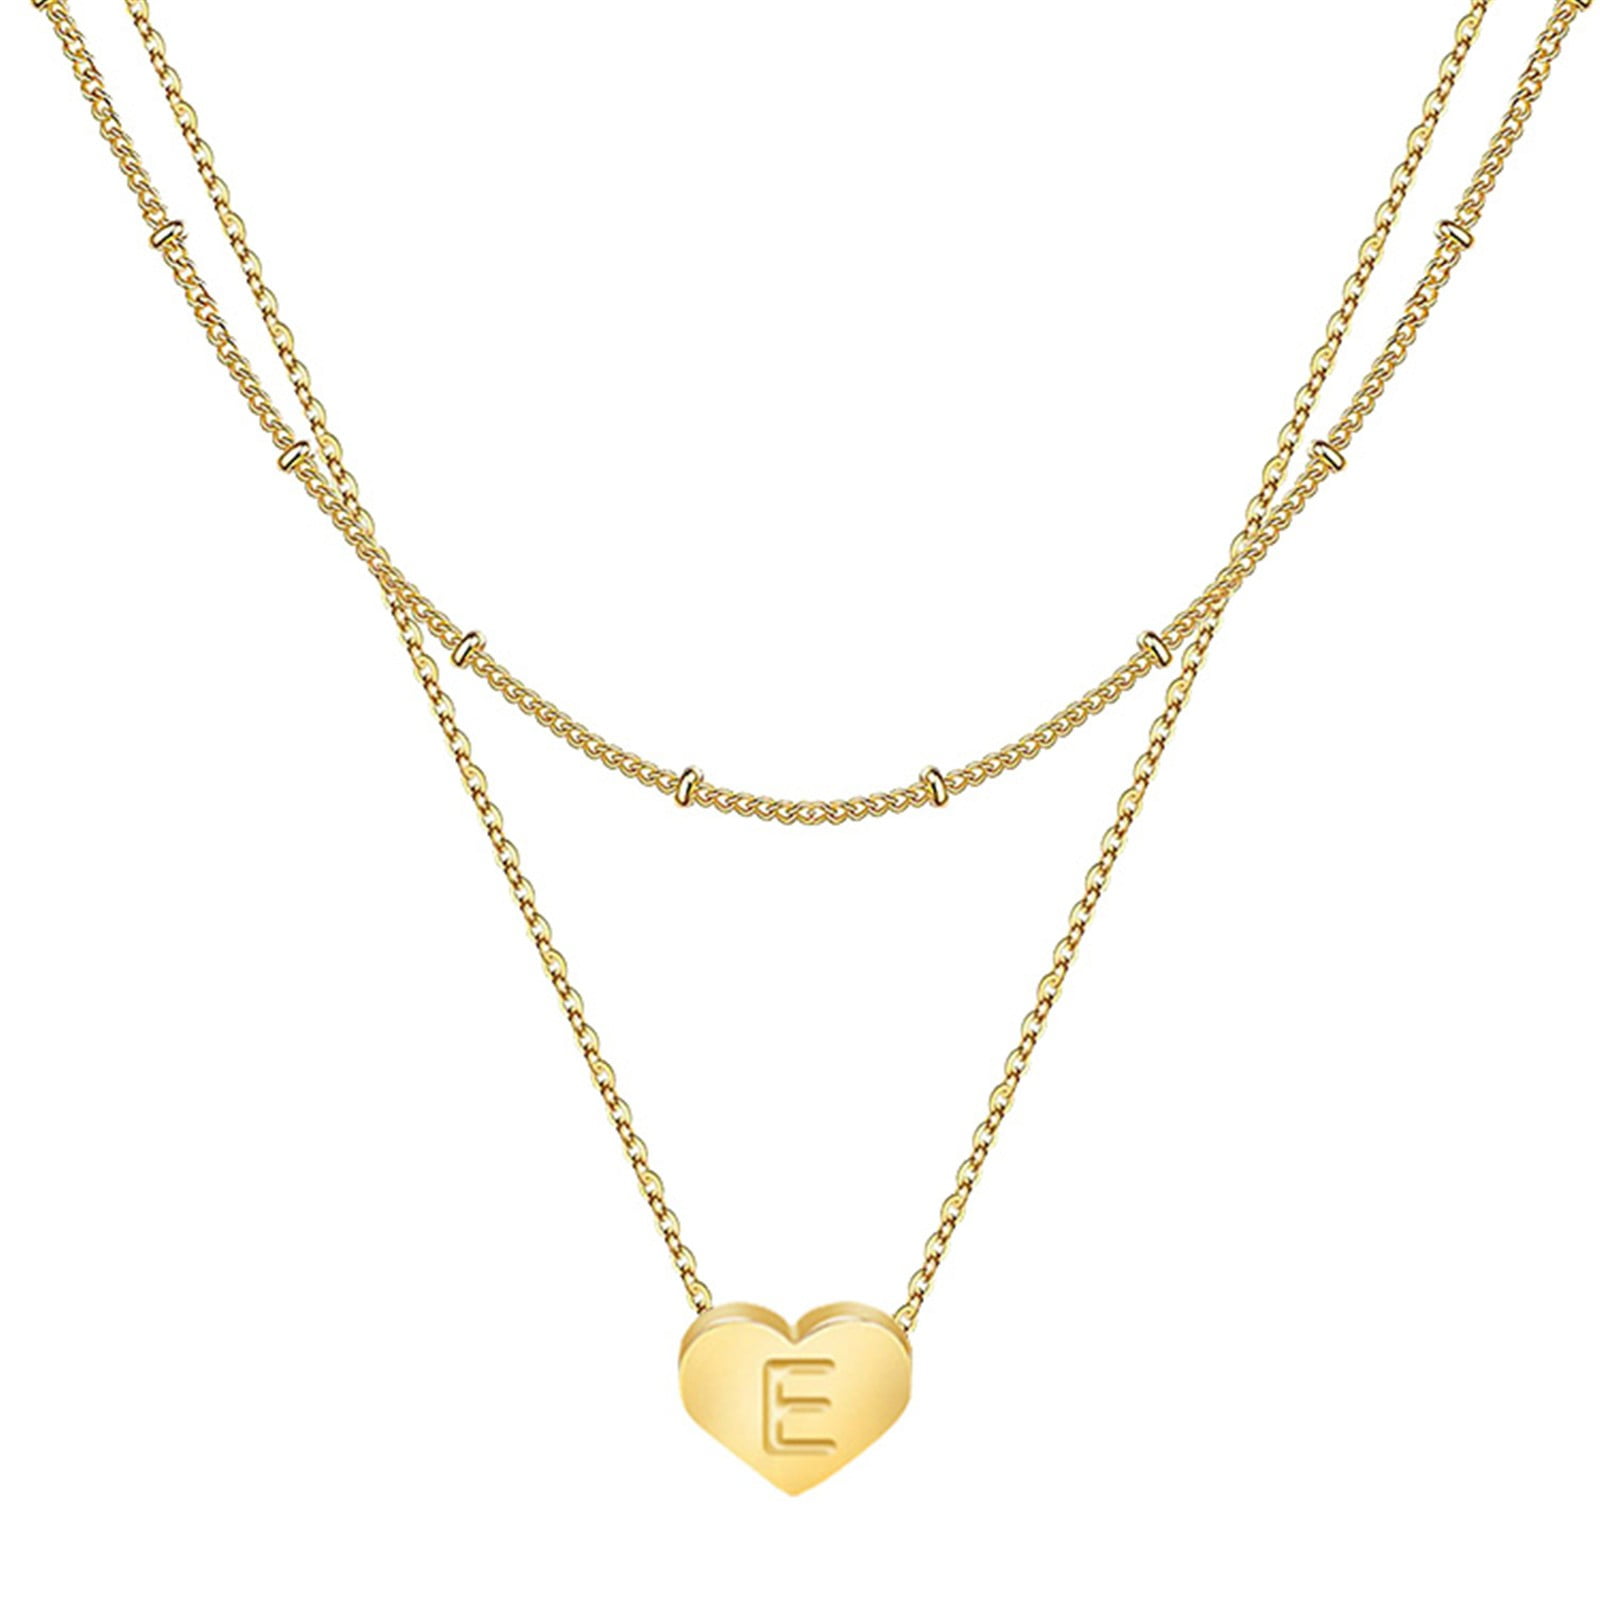 Niahfd Gold Necklace for Women on Sale！ Layered Initial Necklace for ...